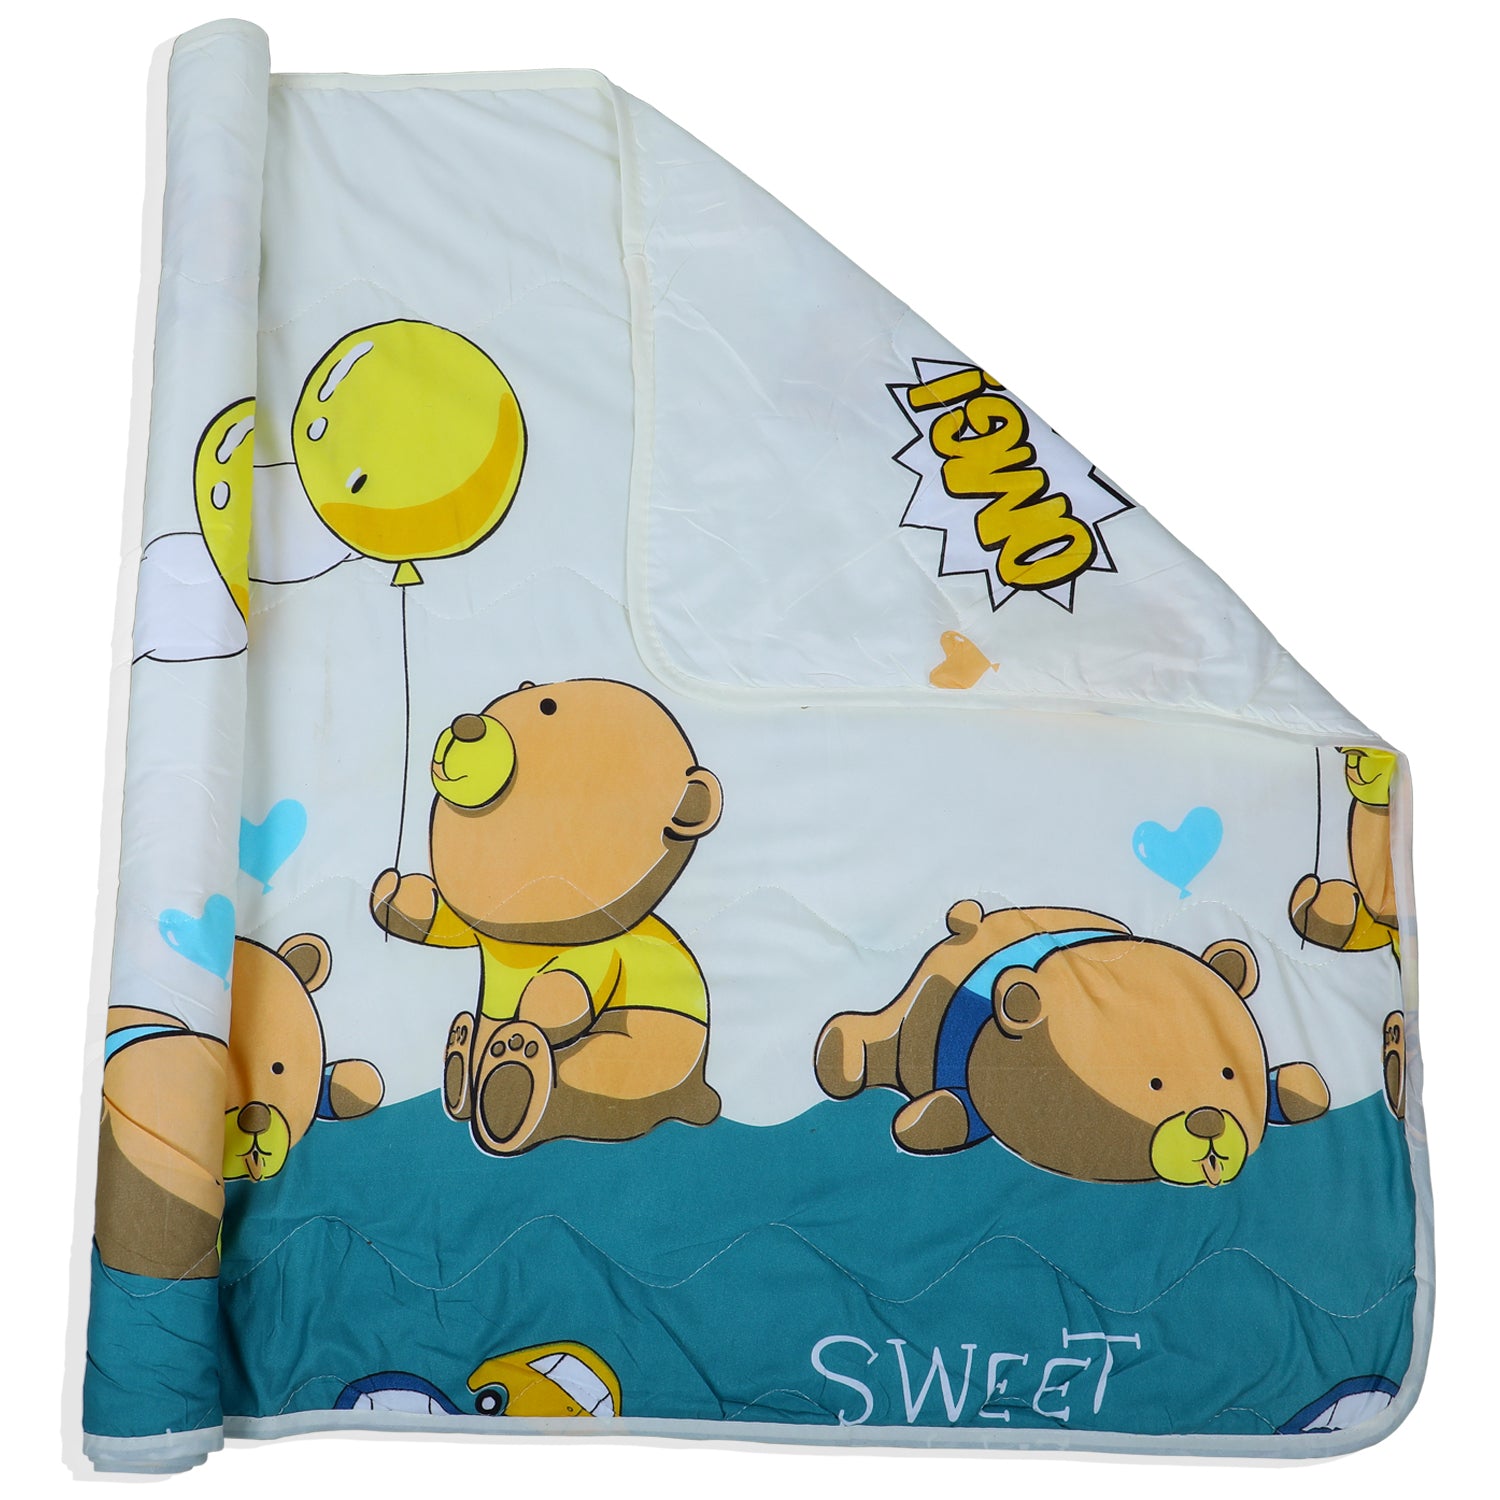 Baby Moo Bear Party Soft Quilted Premium Reversible Blanket - White